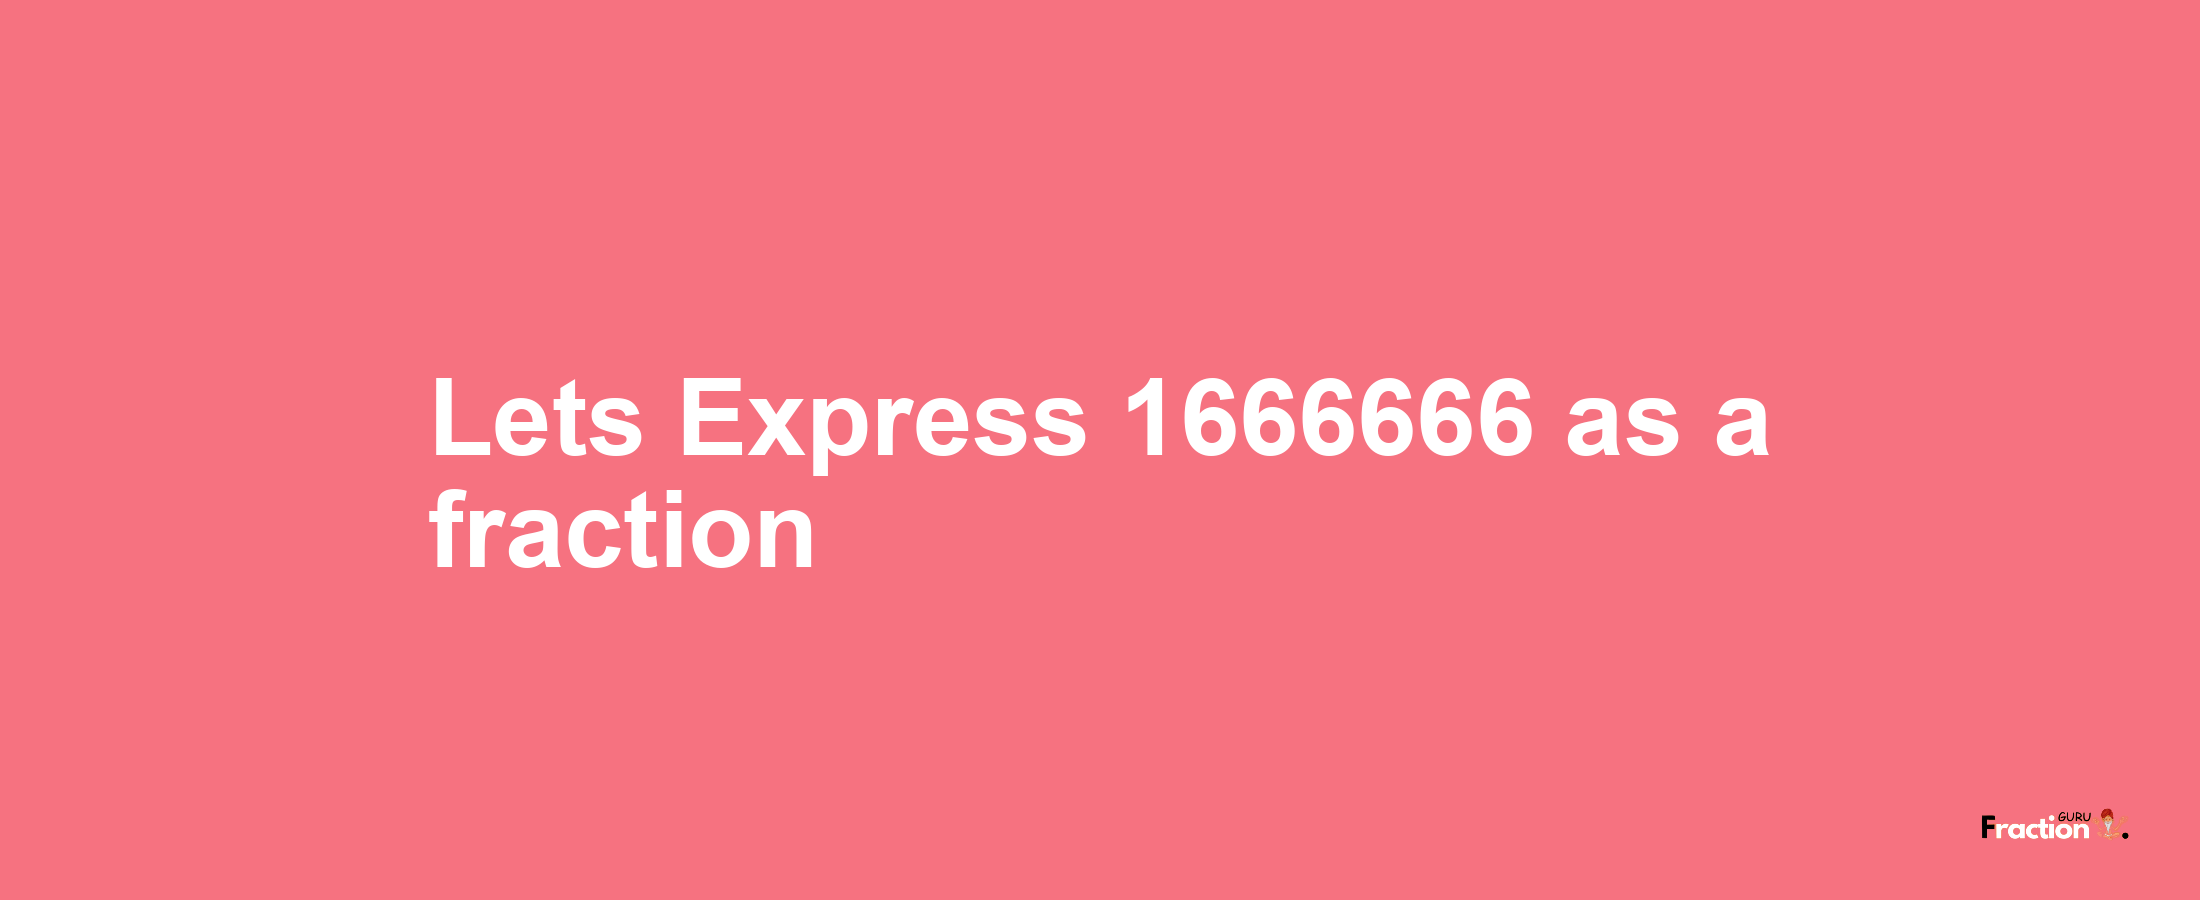 Lets Express 1666666 as afraction